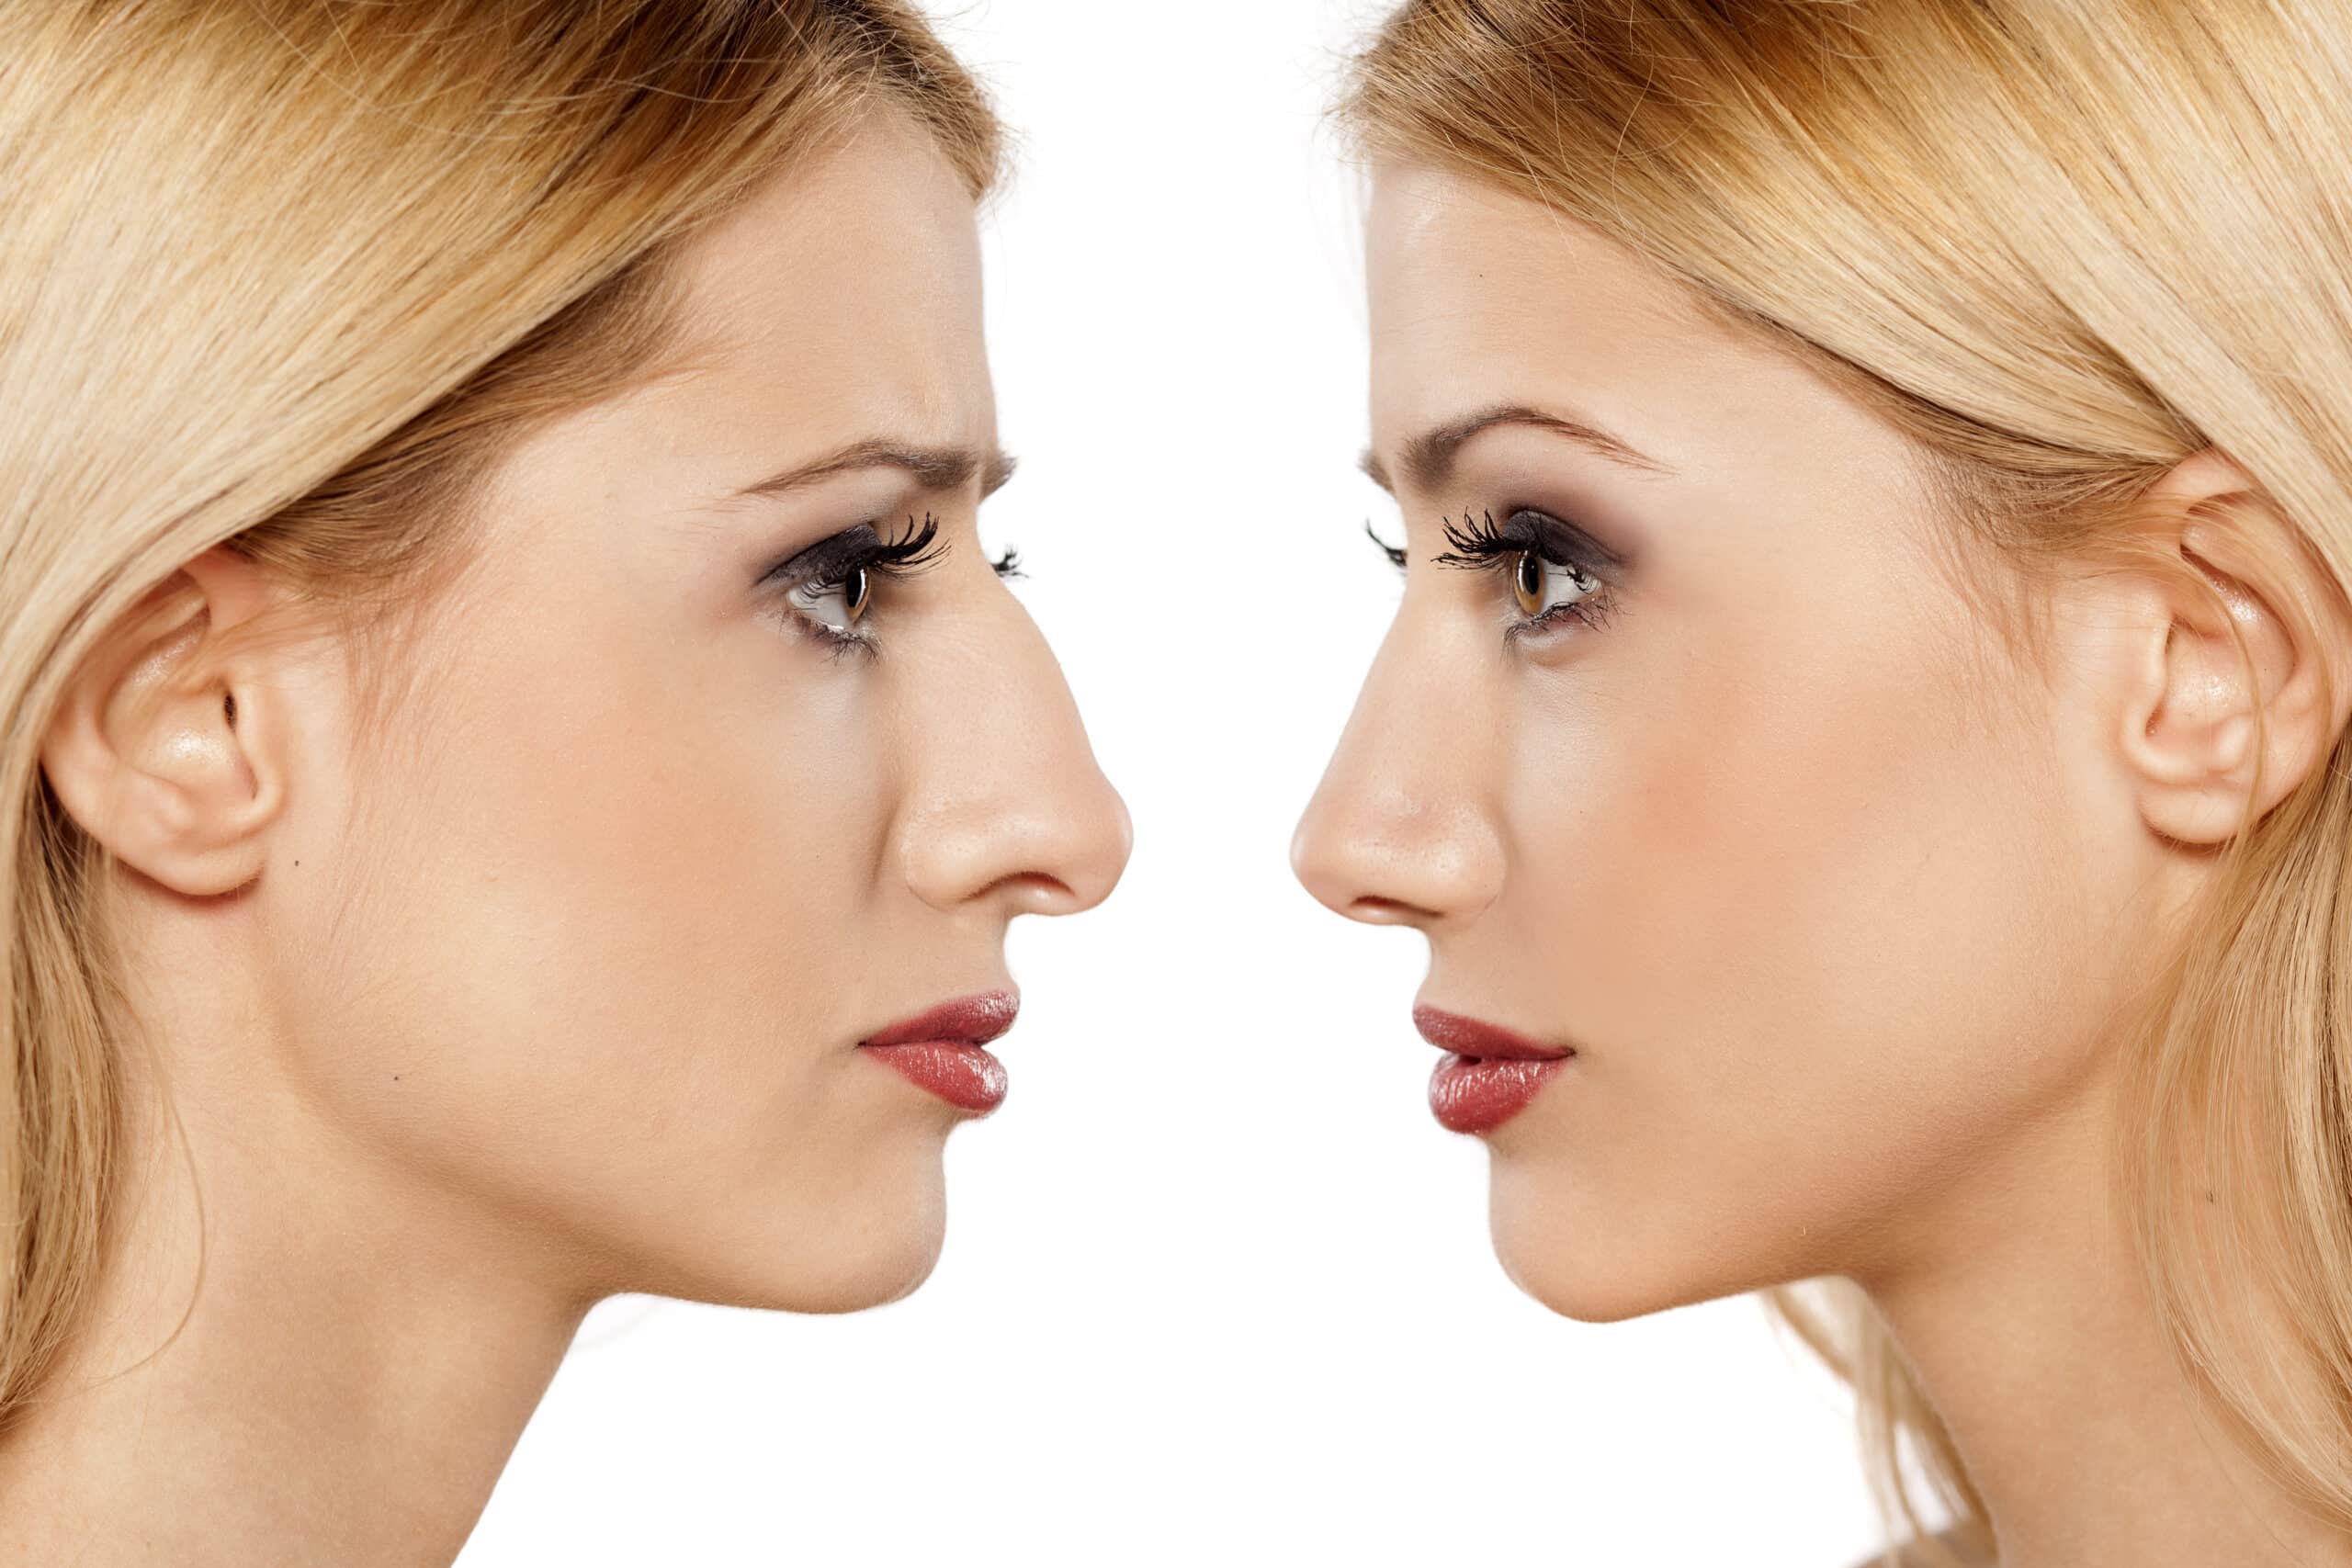 Things to Avoid After a Rhinoplasty Surgery